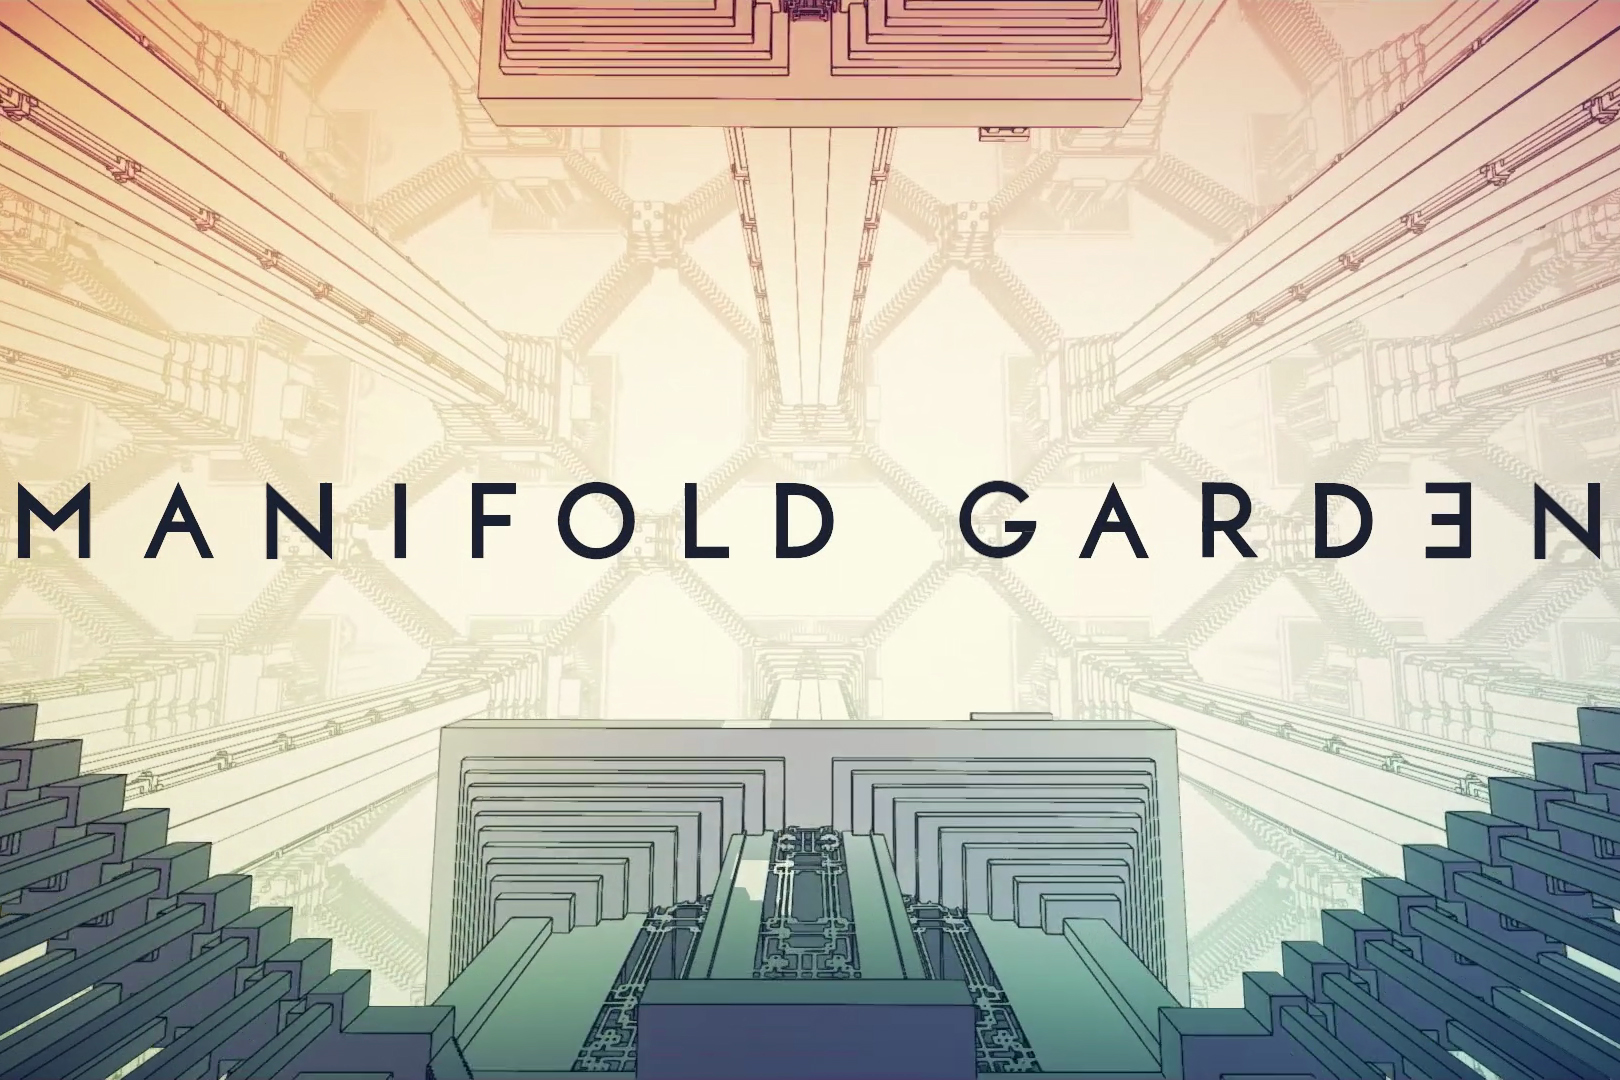 ‘Manifold Garden’ Takes Control With a GPU Rendering Pipeline